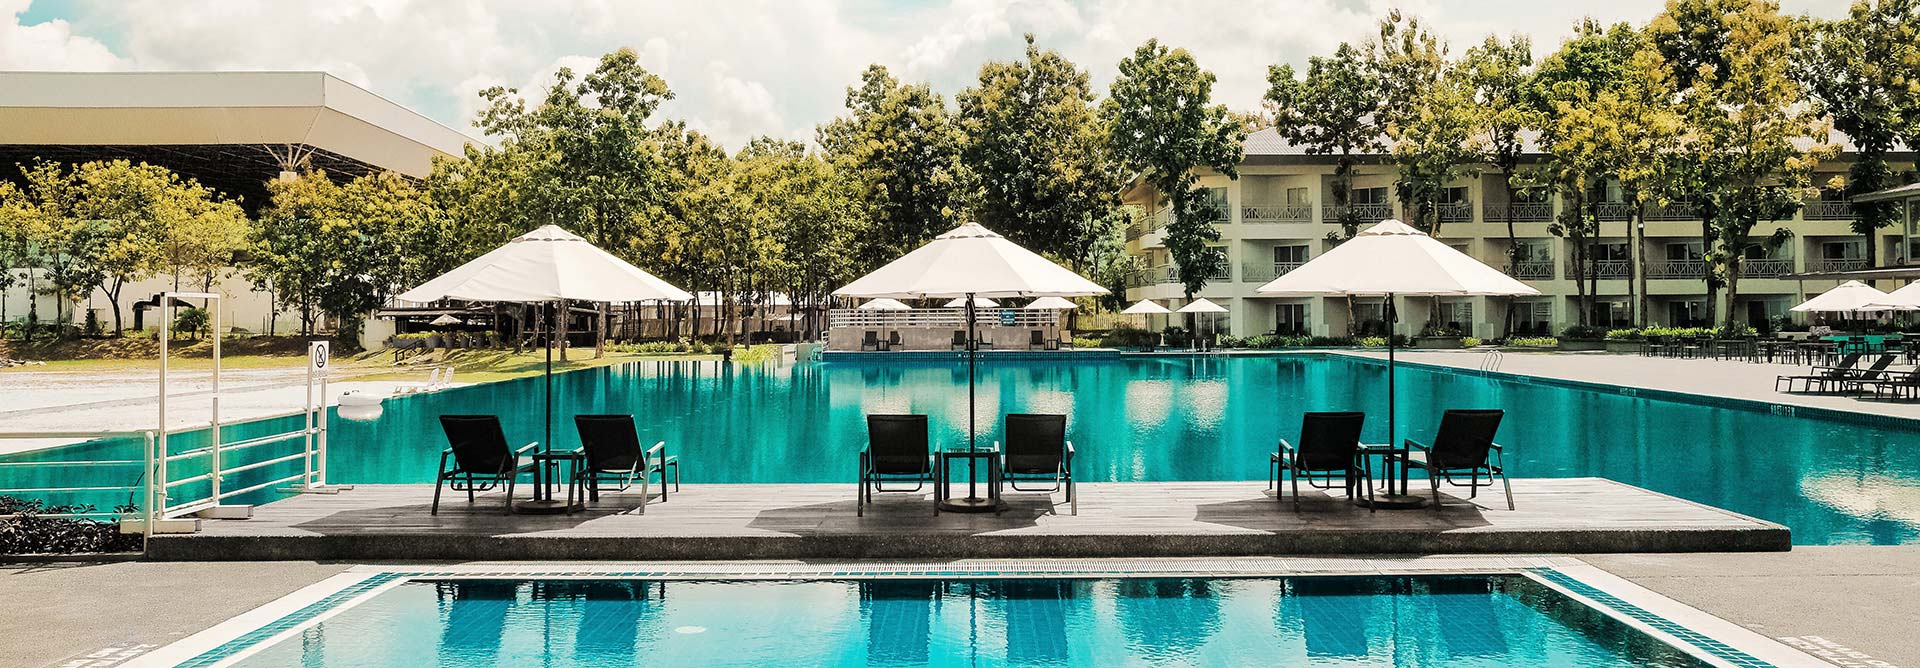 Tranquil view of swimming pool signifying a rejuvenating hospitality environment